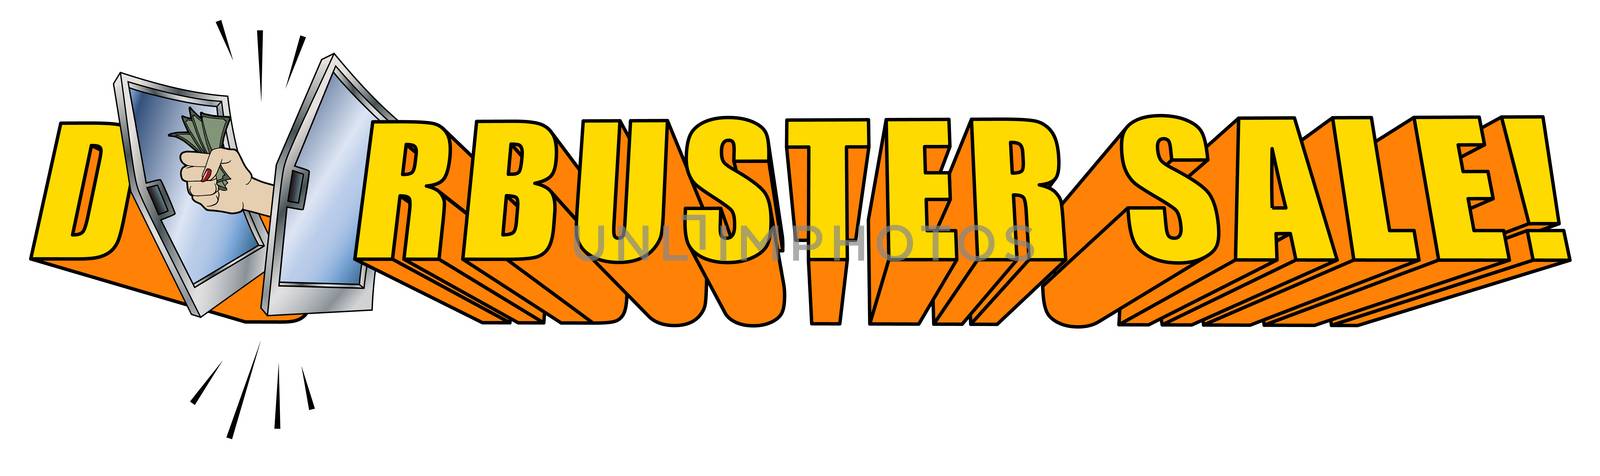 Doorbuster Sale Copy Logo 3D on White Background